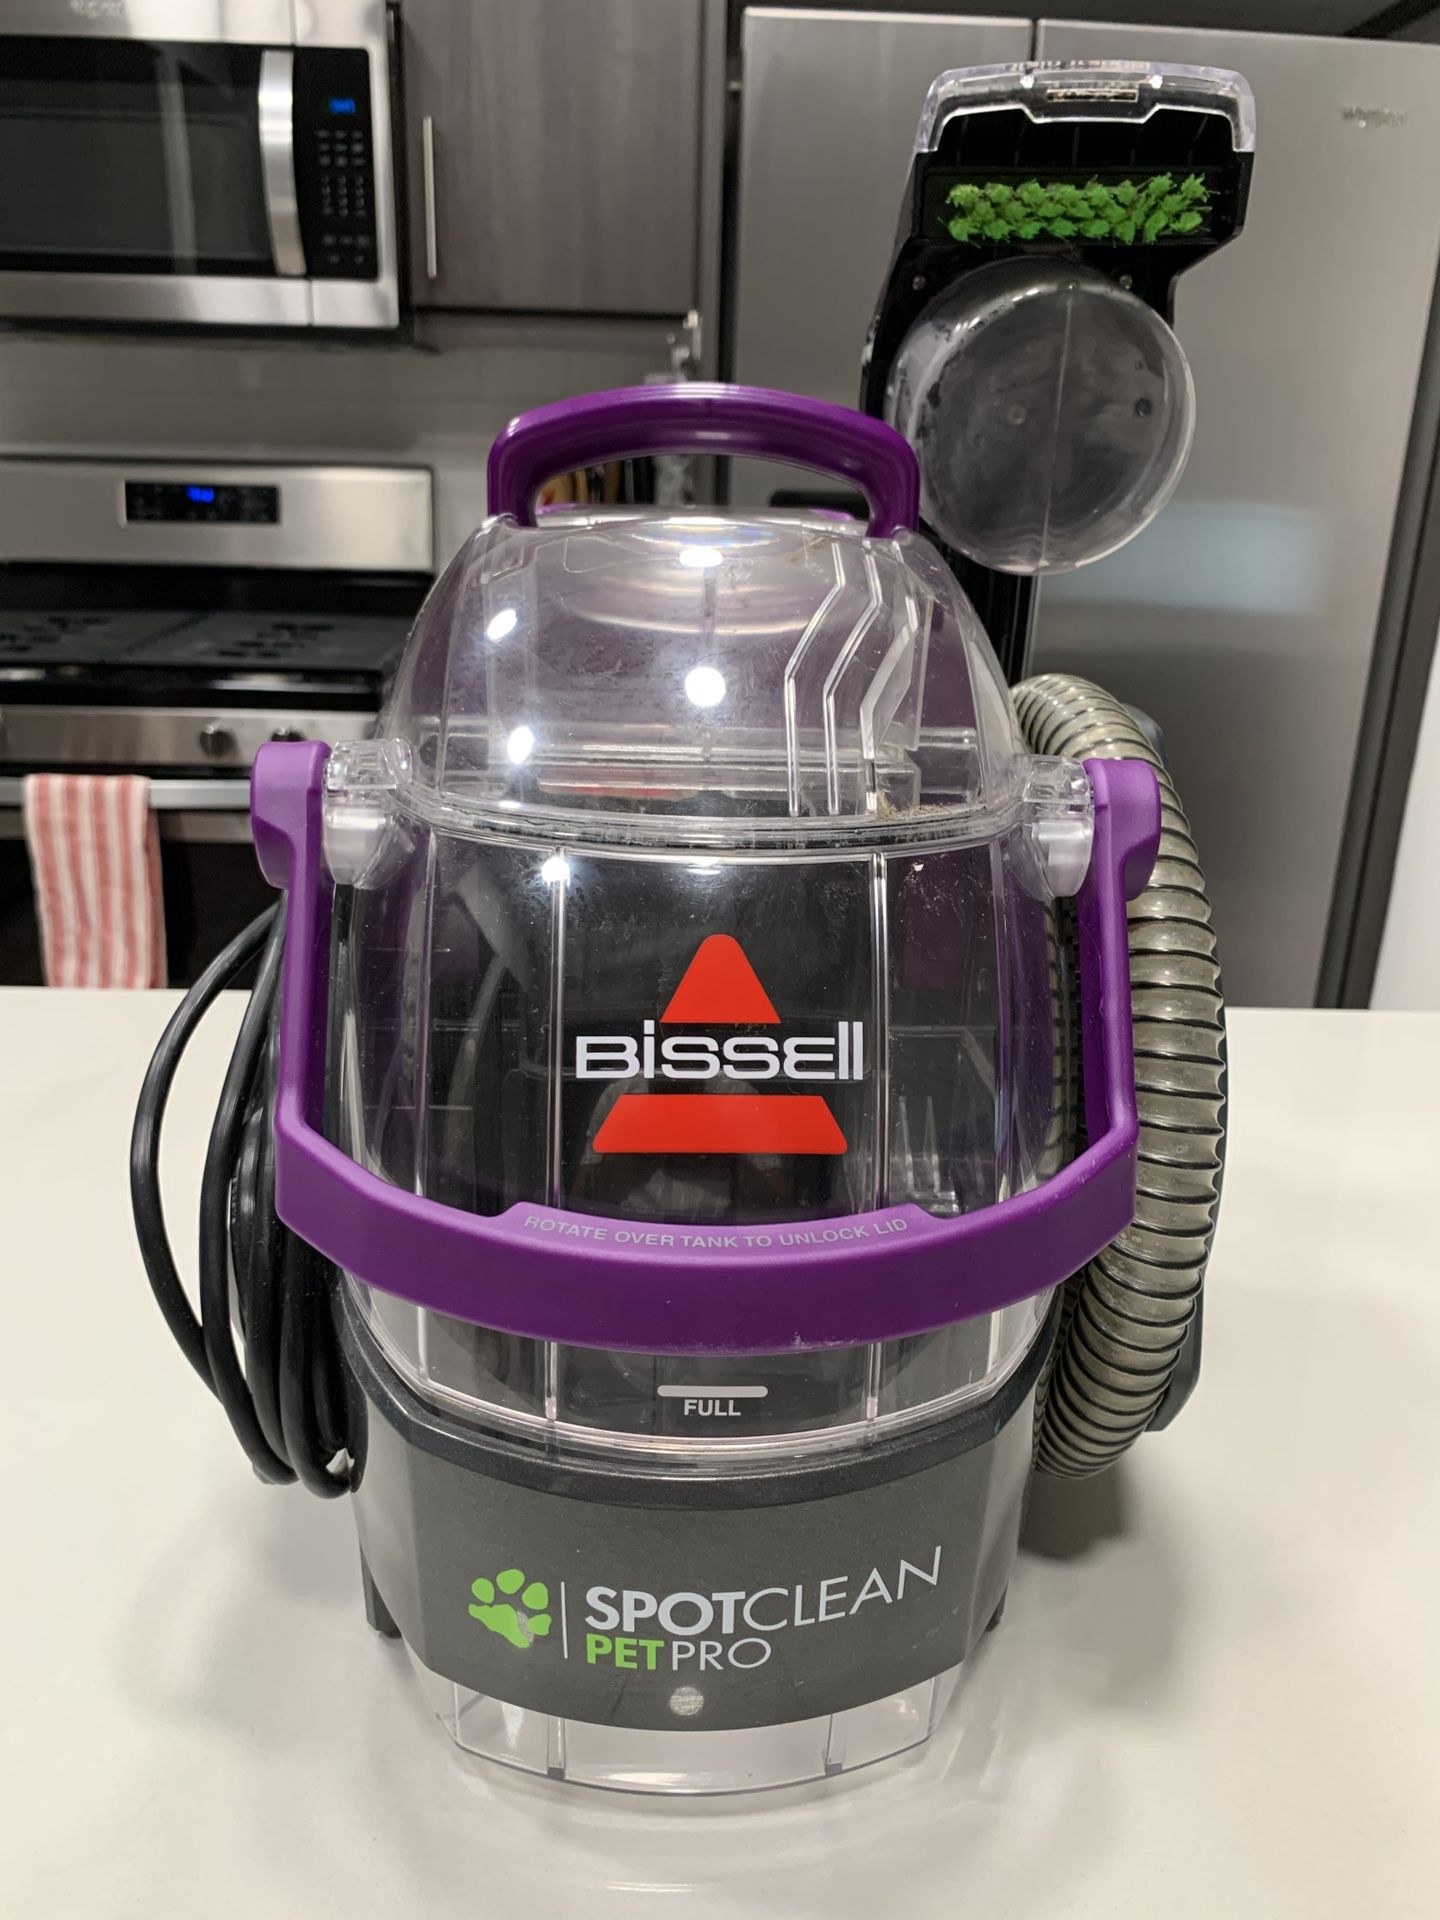 Bissell SpotClean Pet Pro™ Portable Carpet Cleaner